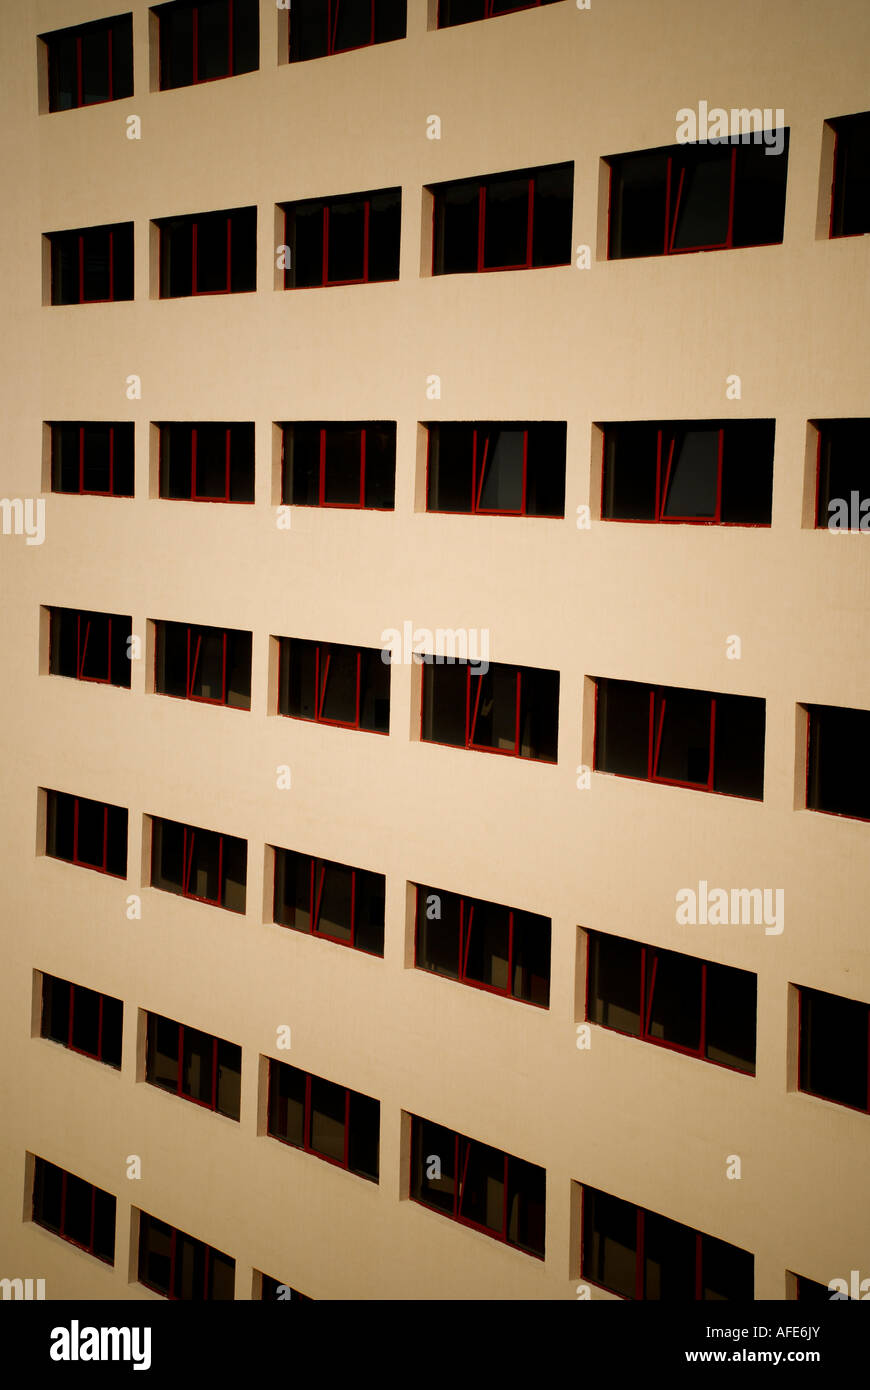 Hotel/ office tower block - Architecture Stock Photo